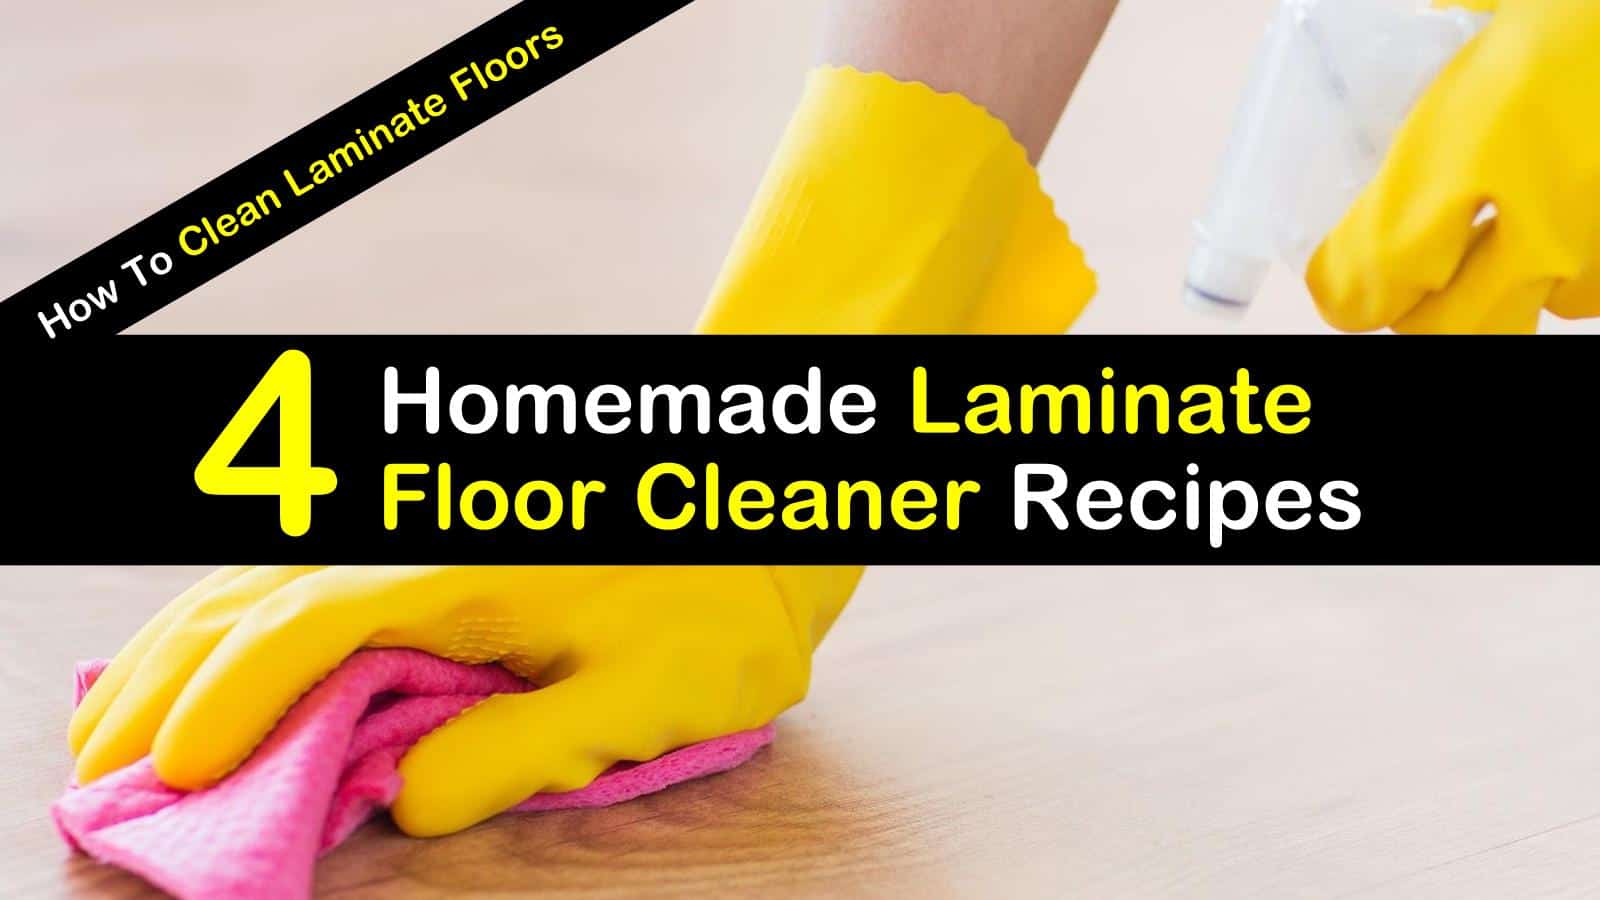 How To Clean Laminate Floors 4, Can I Use Vinegar To Clean Laminate Floors